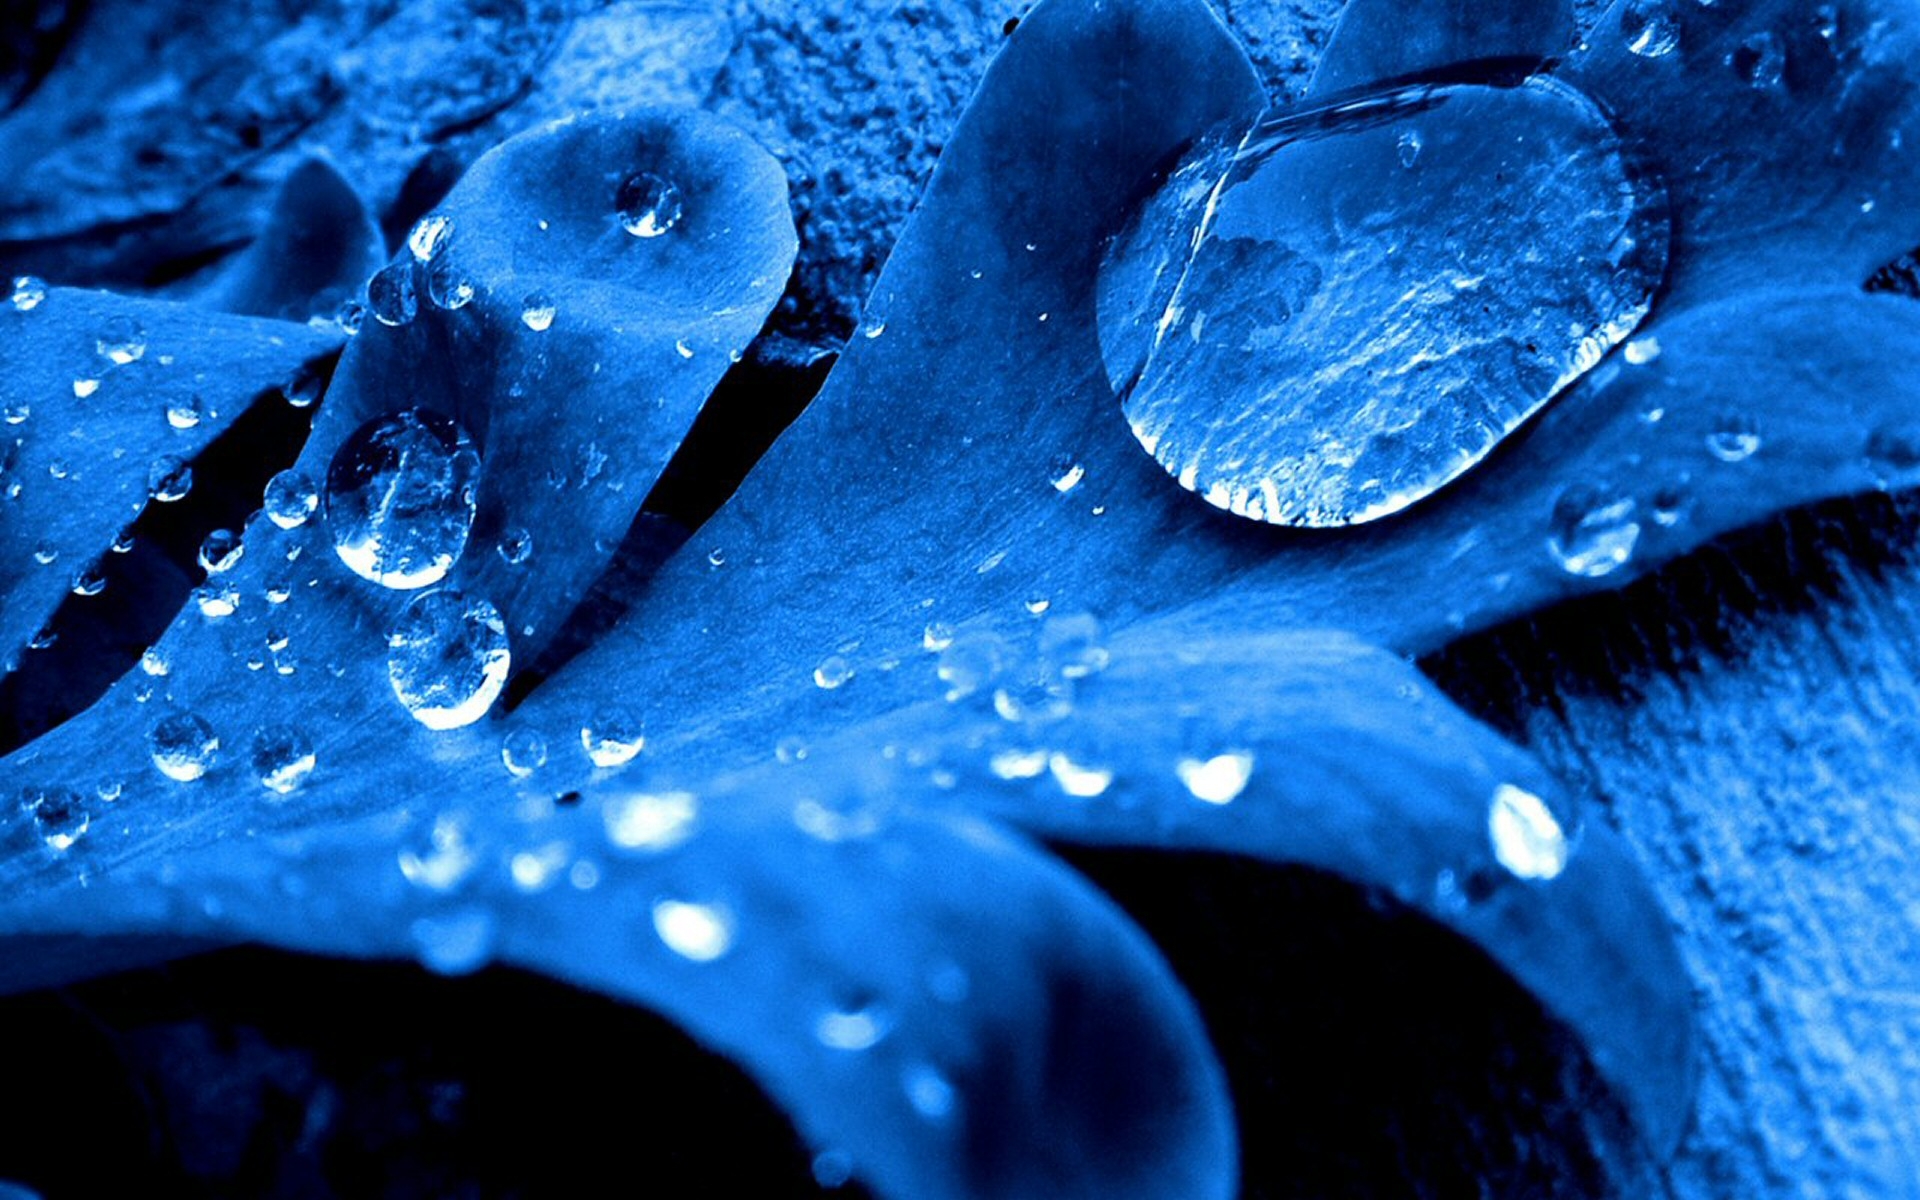 Dark Blue Leaf Wallpaper And Image Pictures Photos